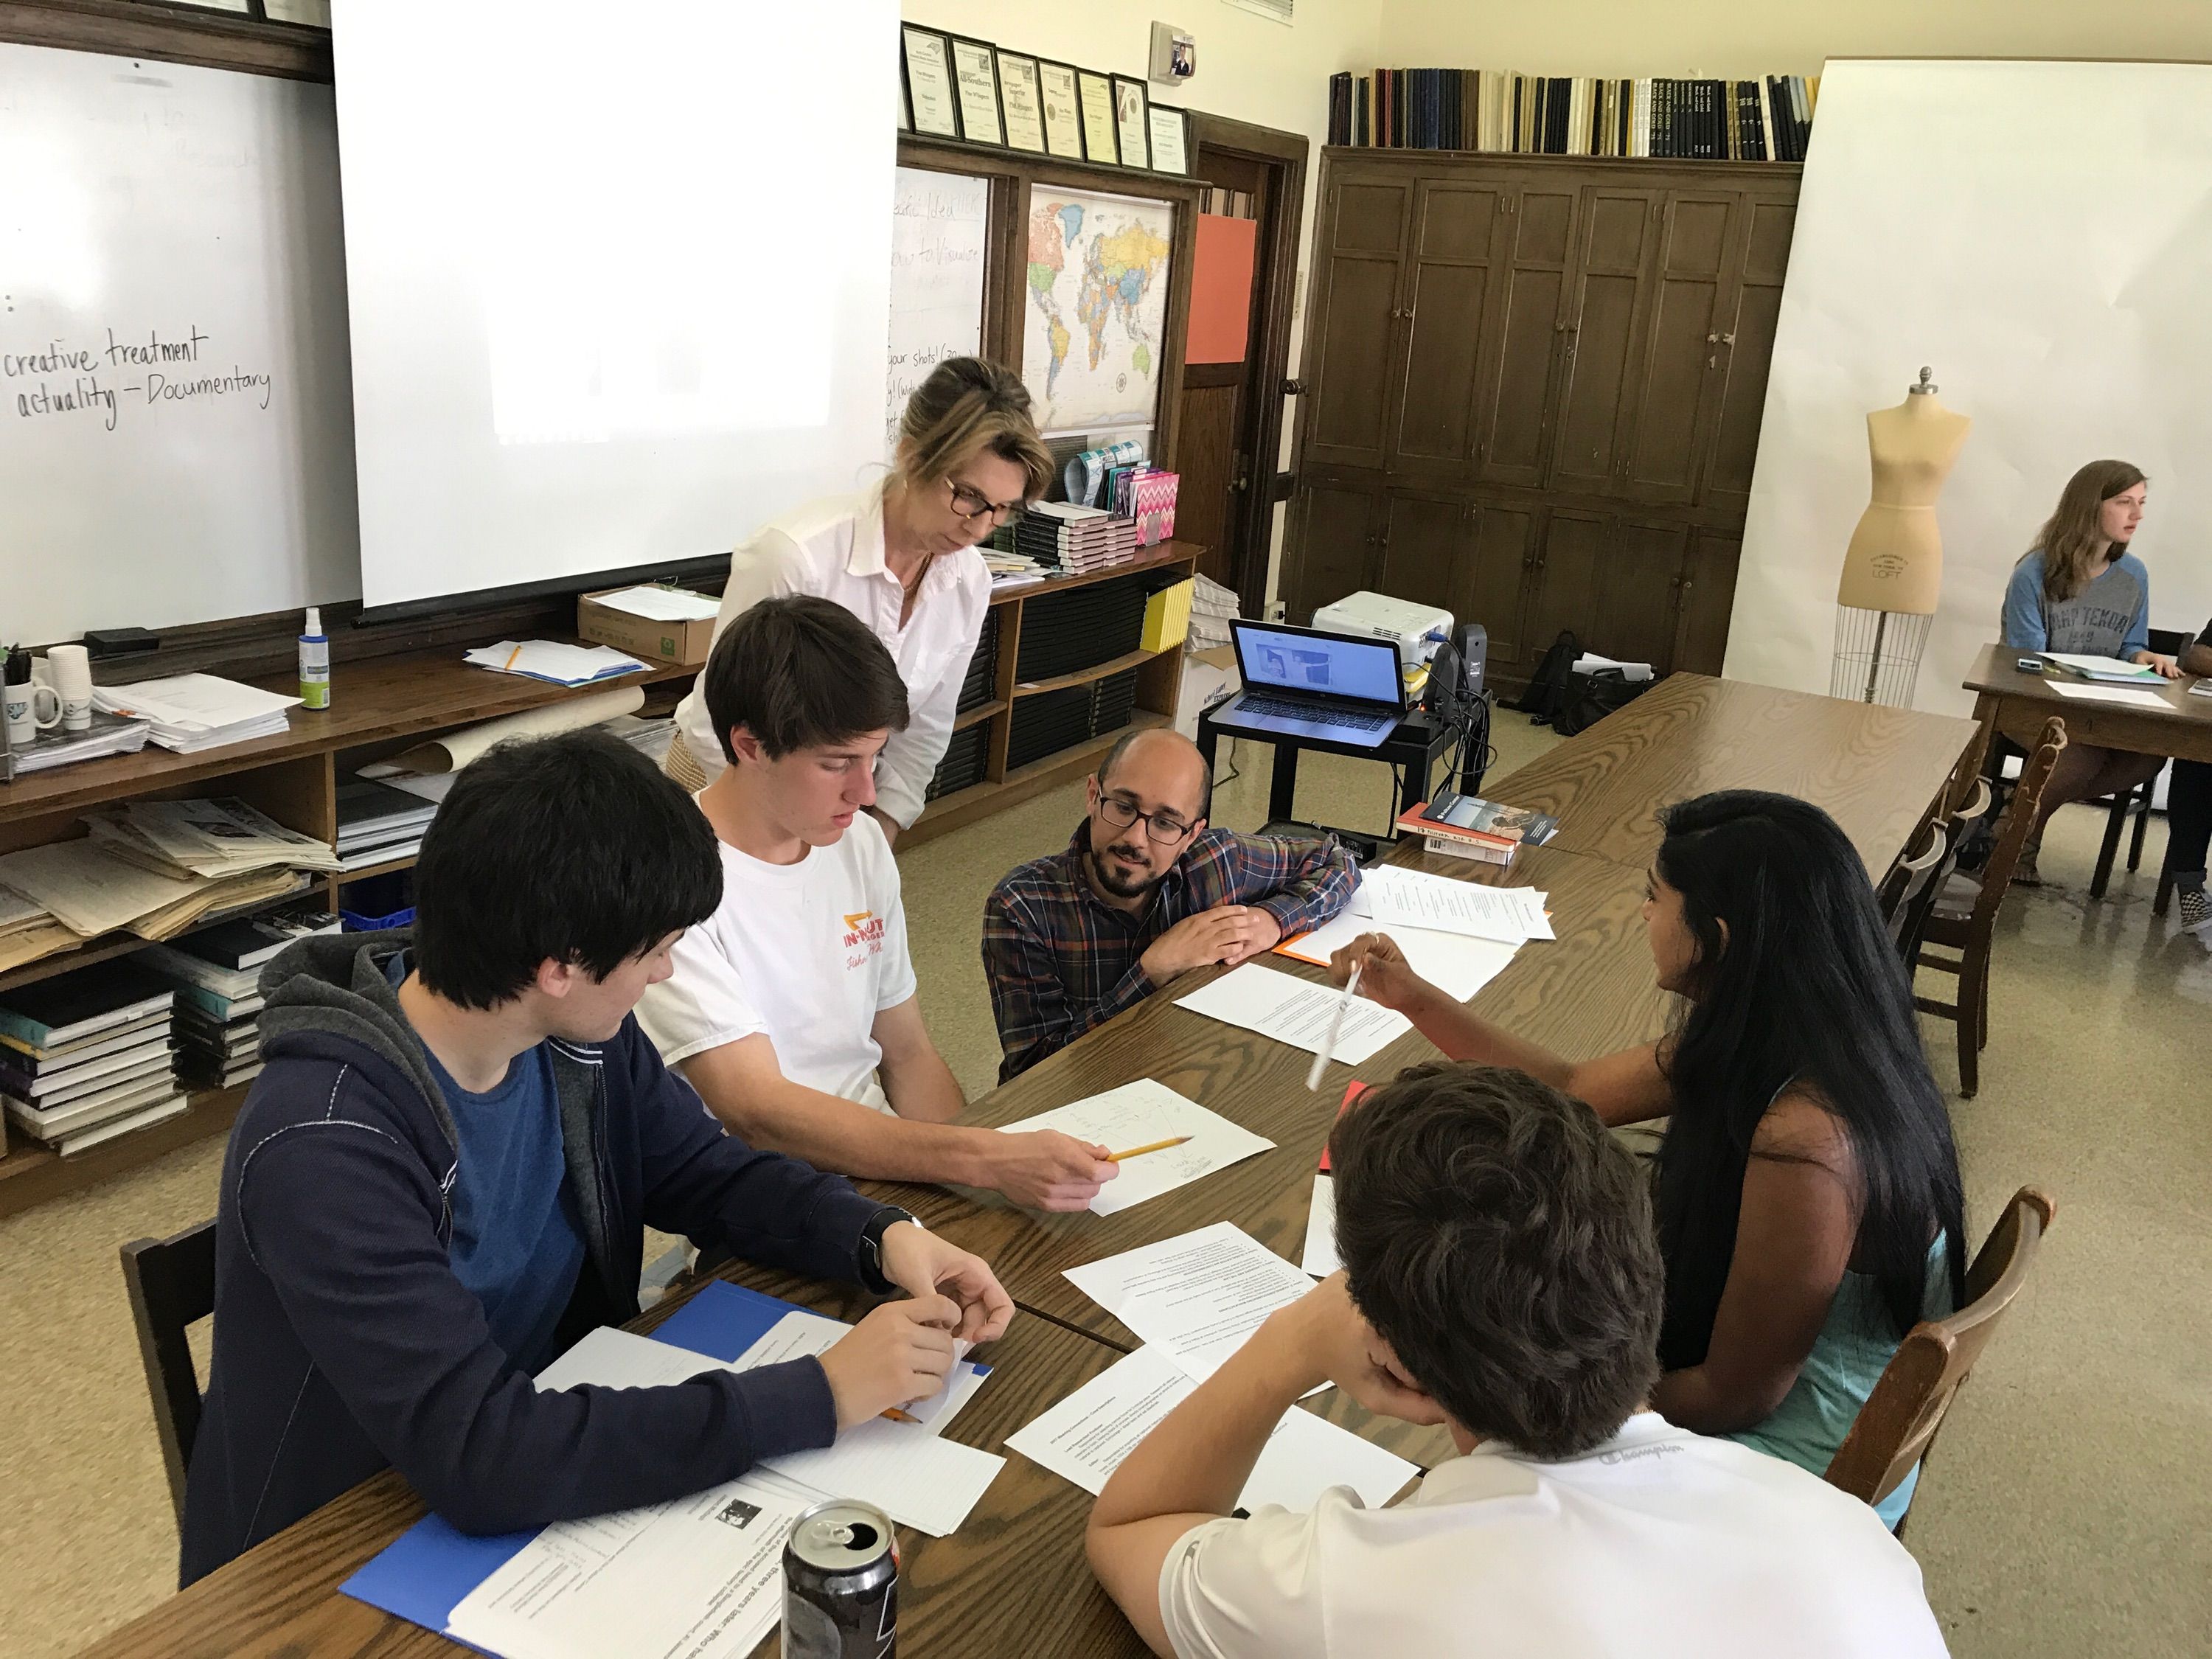 Diana Greene, who developed and facilitated the Weaving Connections program, and Pulitzer Center Senior Education Manager Fareed Mostoufi work with students to develop story ideas for their part of the Weaving Connections documentary. Image by Karen Morris. United States, 2017.